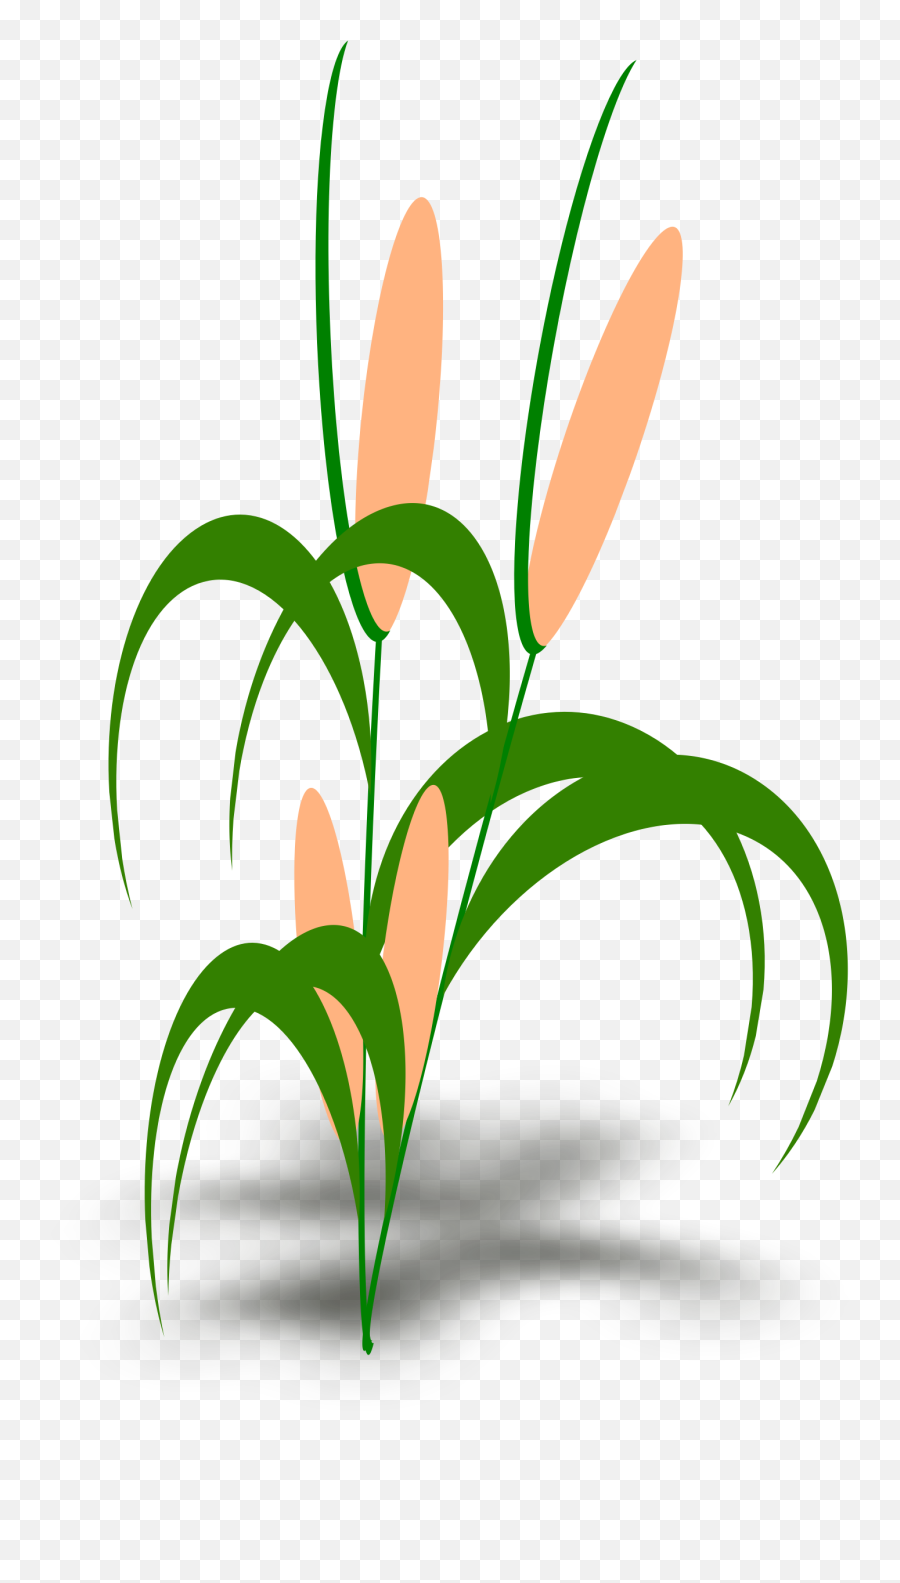 Corn Plant With The Green Leaves - Food Chain Of A Snail Png,Corn Plant Png